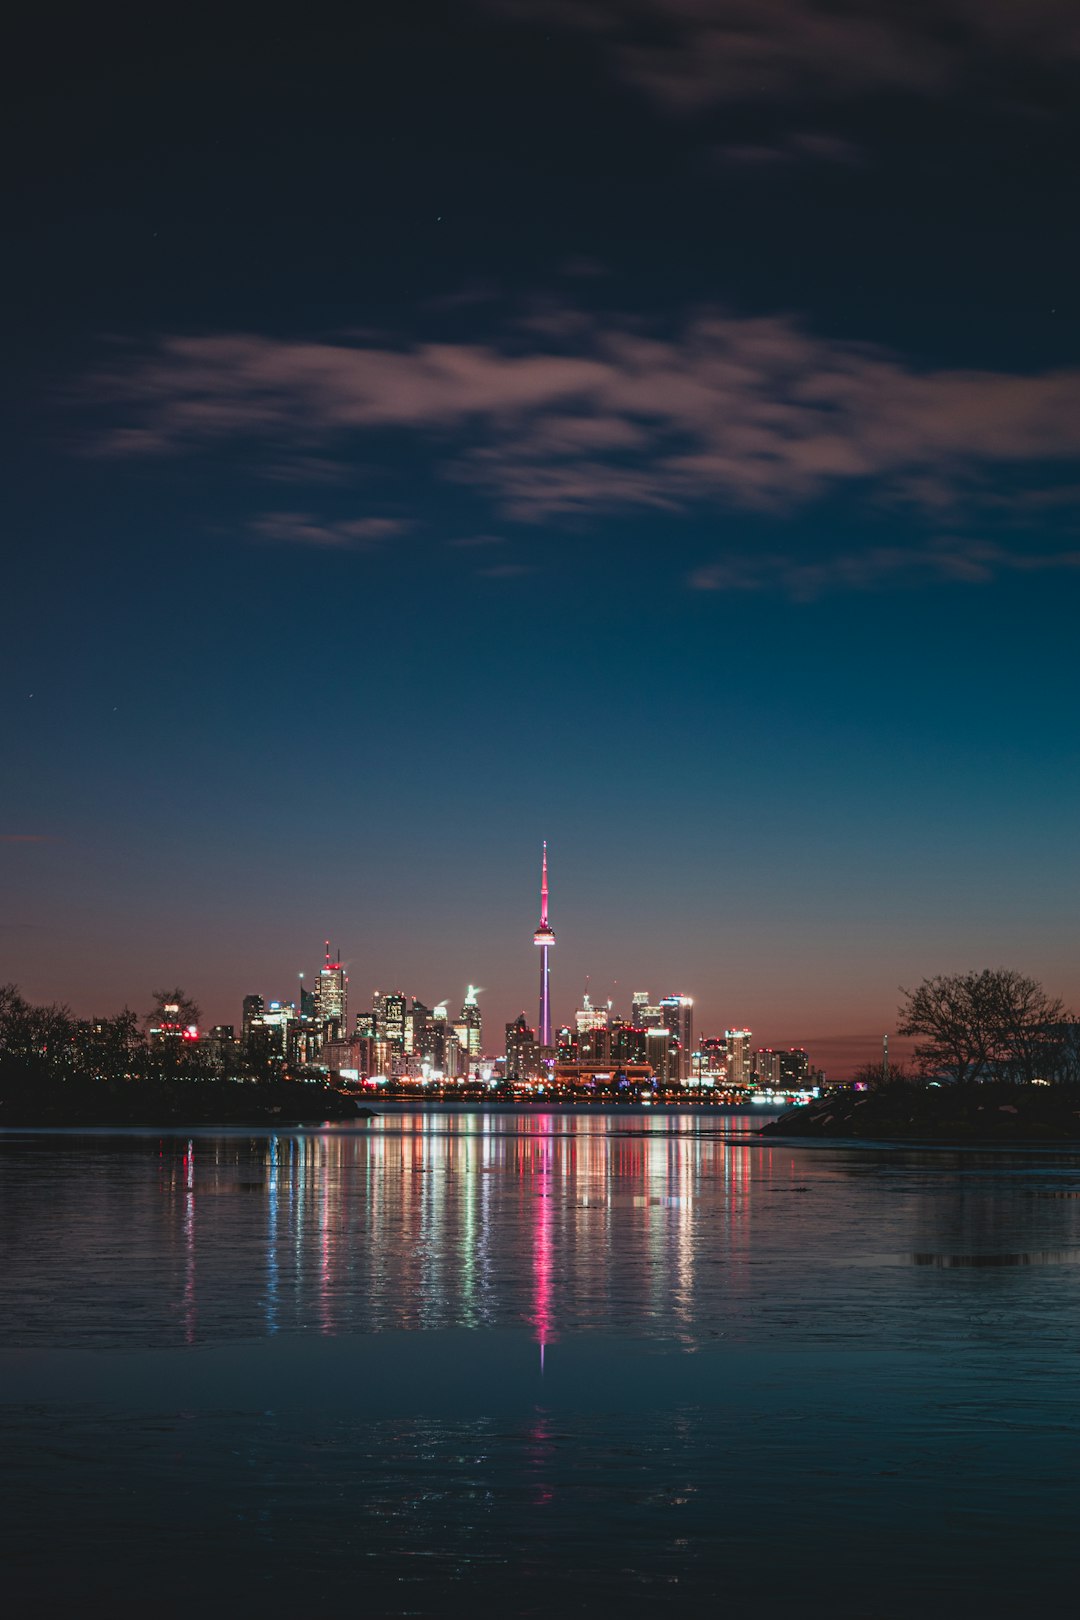 Travel Tips and Stories of Toronto in Canada